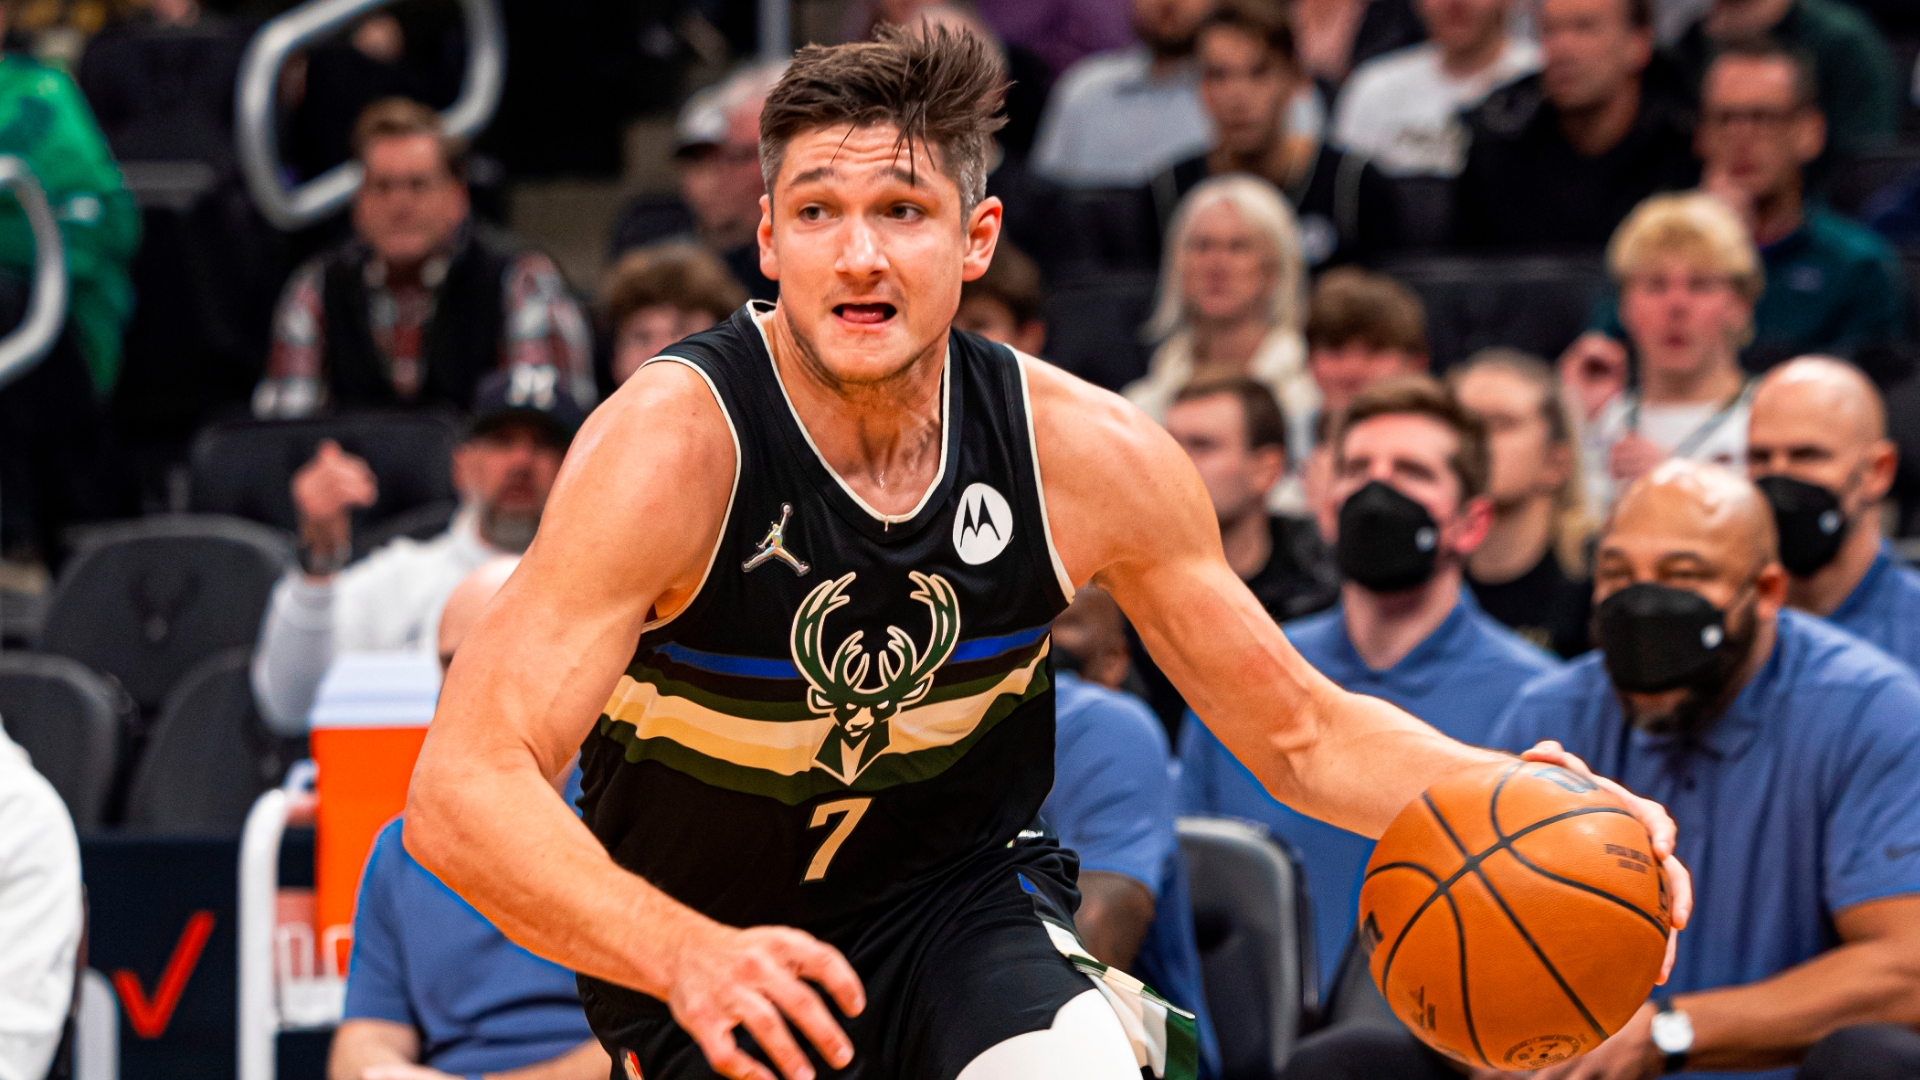 Grayson Allen ejected: Did Bucks guard's reputation factor into Flagrant 2 call for fouling Bulls' Alex Caruso?